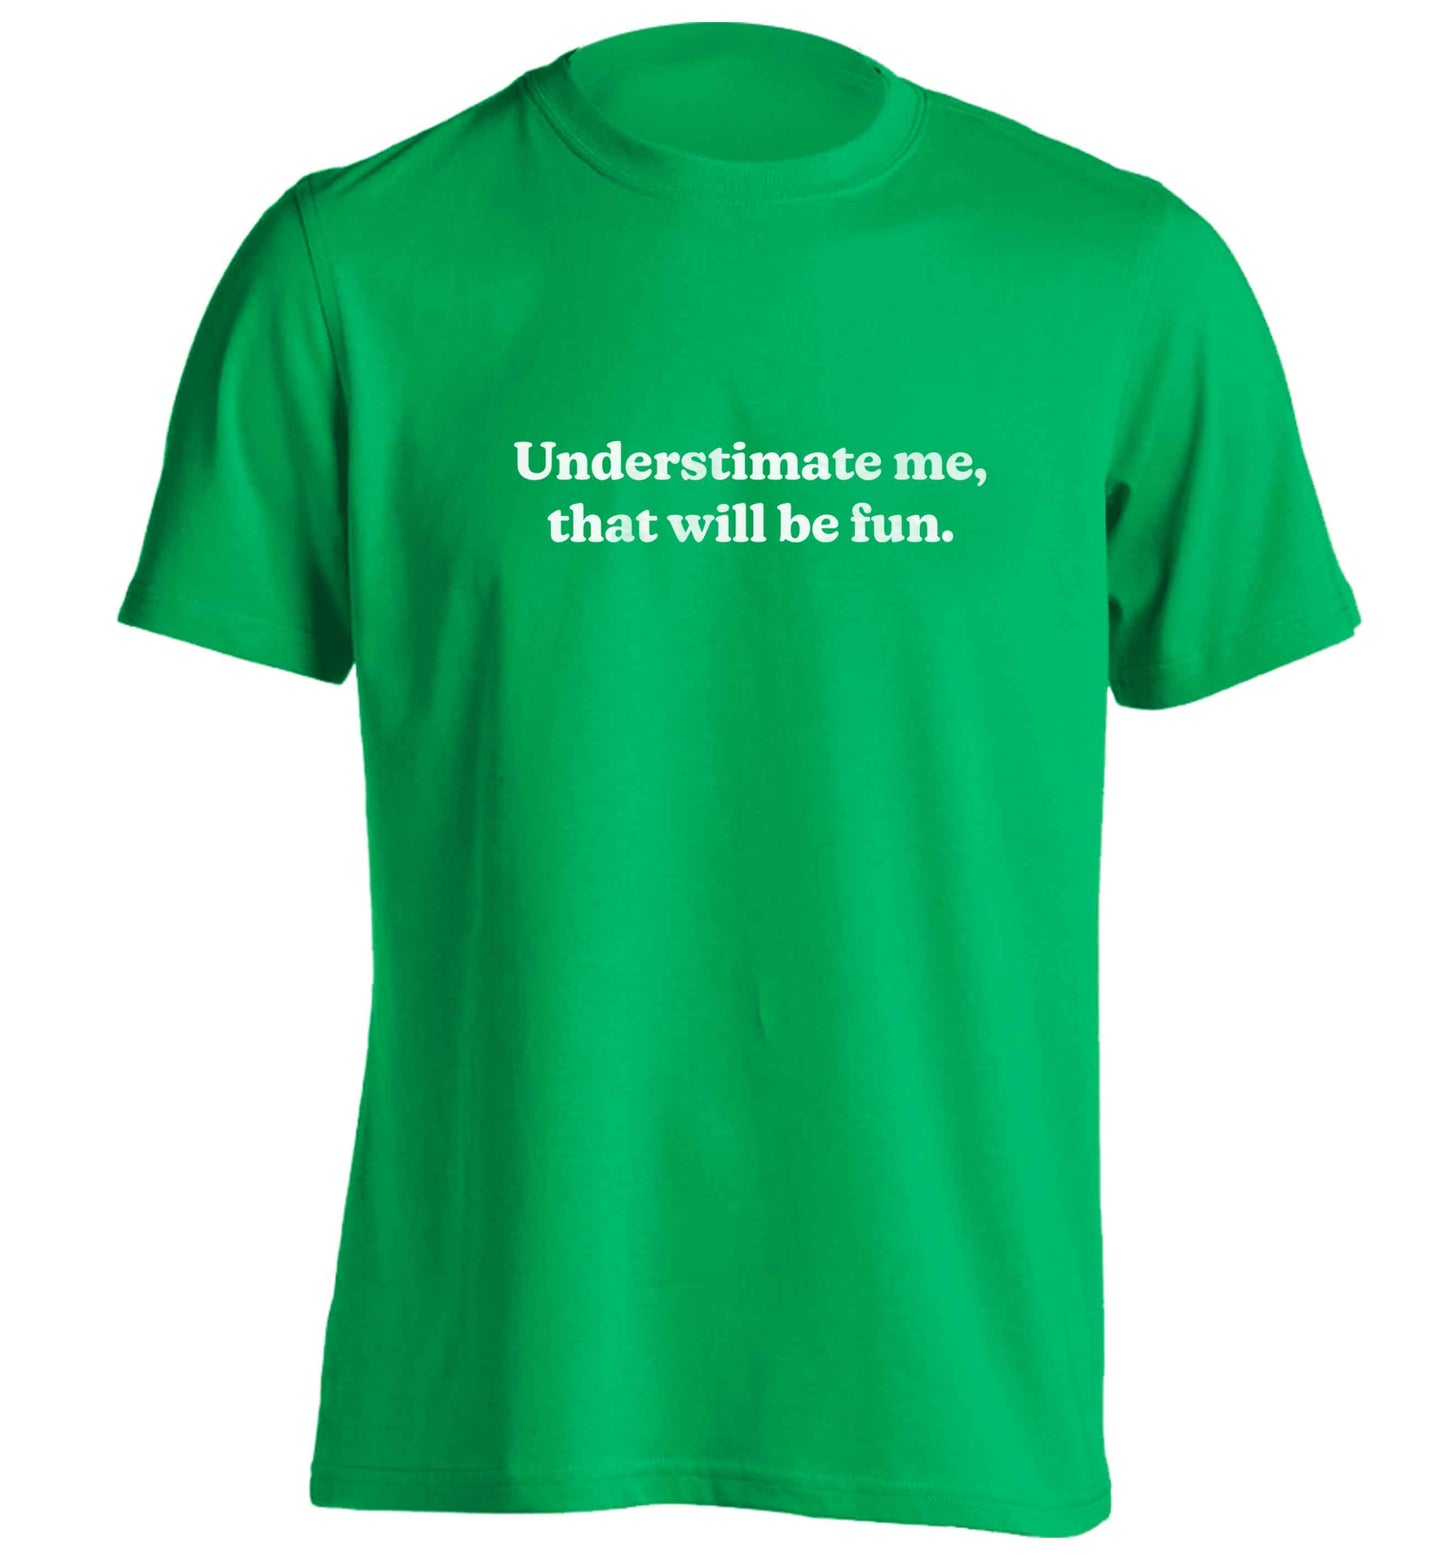 Underestimate me that will be fun adults unisex green Tshirt 2XL